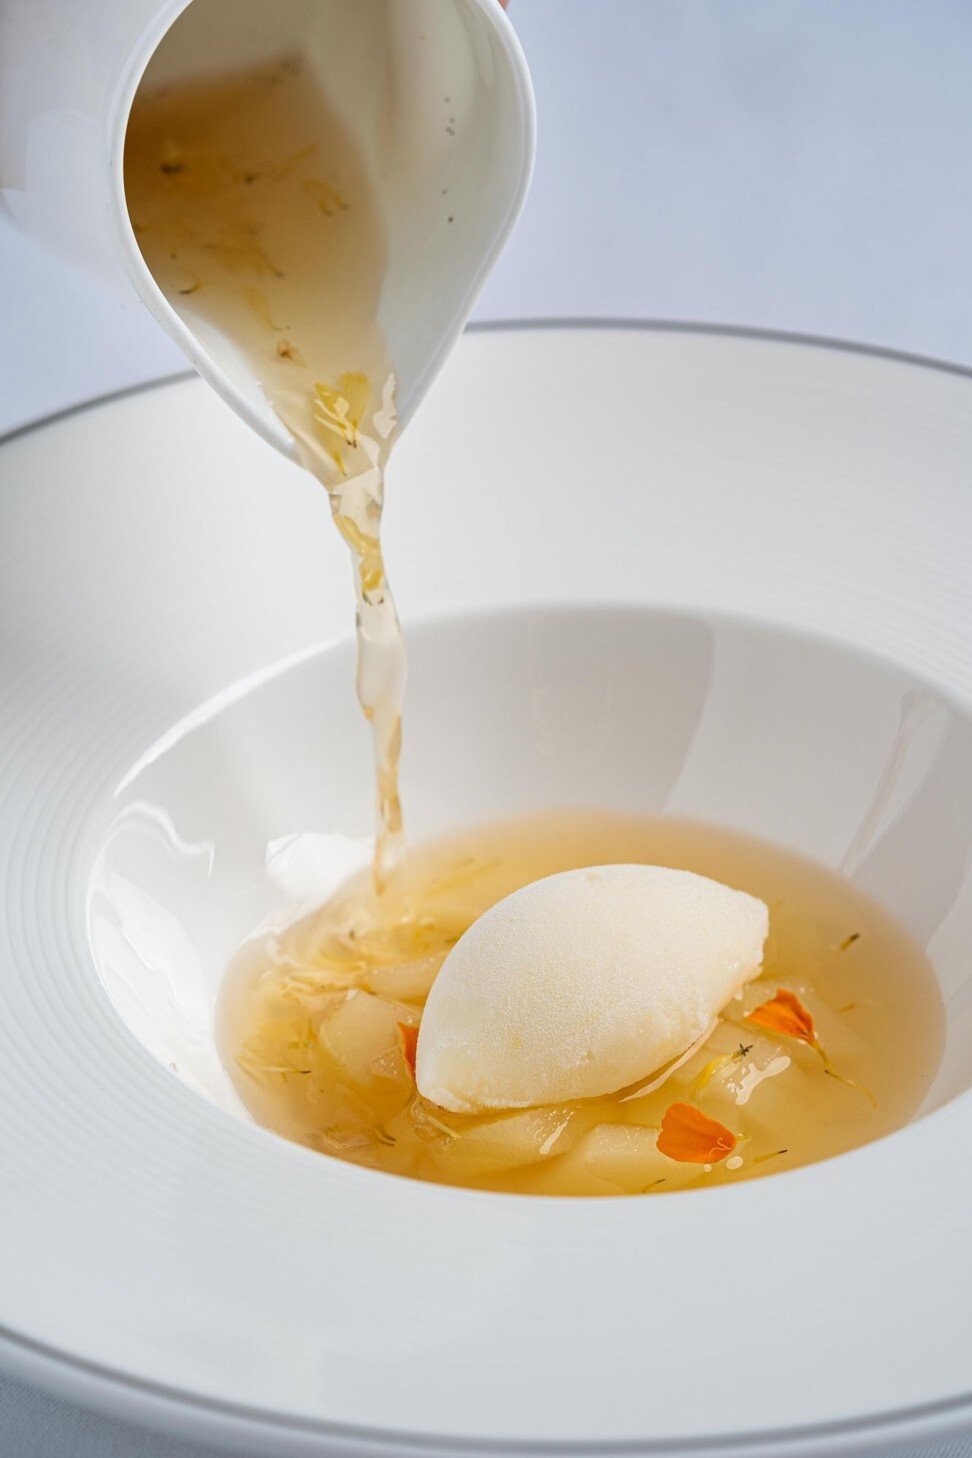 Cafe Gray Deluxe's chilled soup of chrysanthemum and pear. Photo: Courtesy of The Upper House